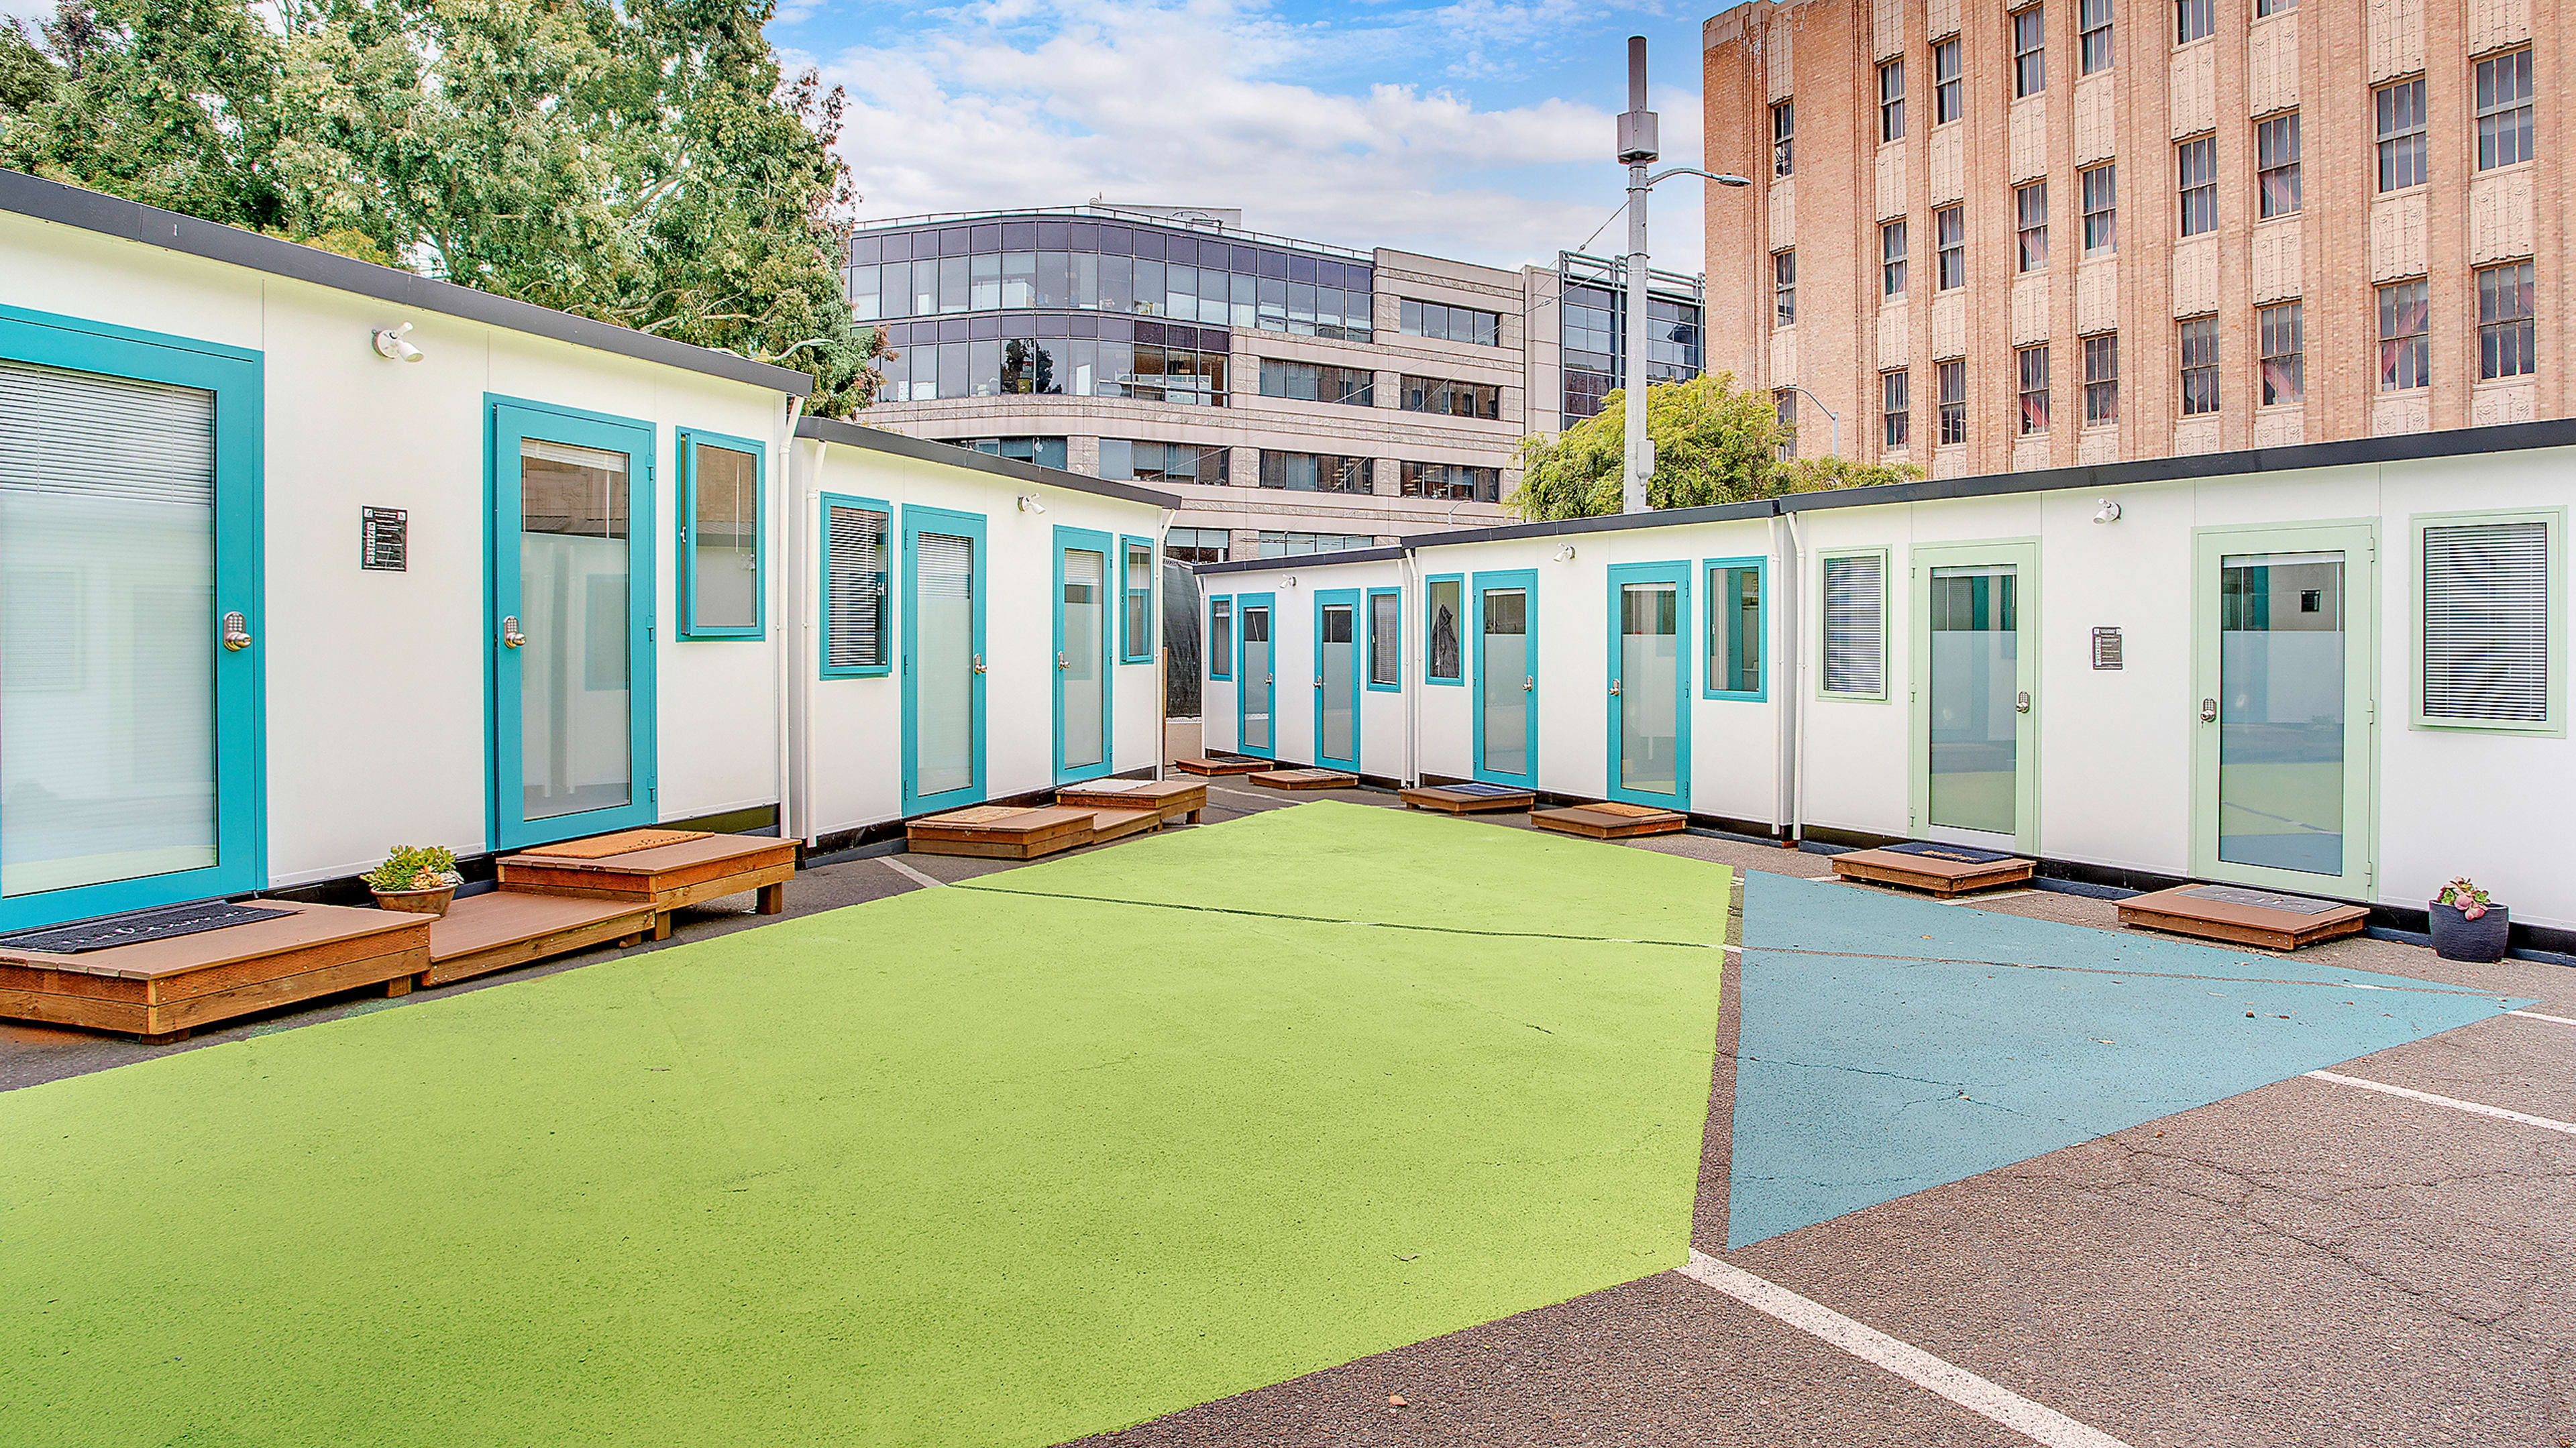 Why these cities may trade parking lots for tiny houses